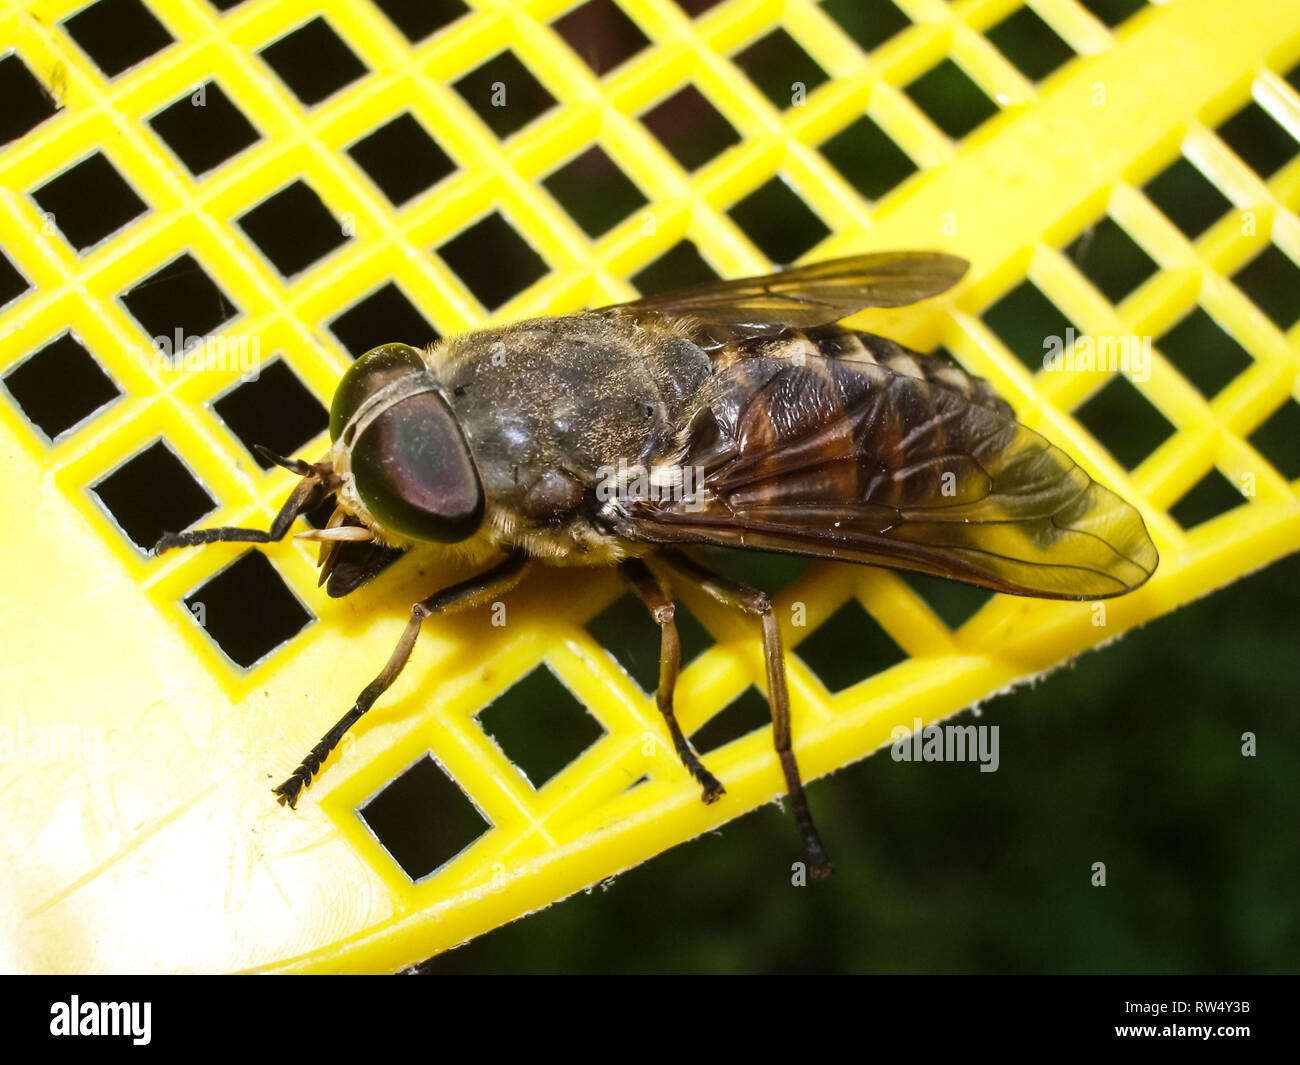 Gadfly, bloodsucking insect horsefly. Gadfly bloodsucking insect horsefly Stock Photo